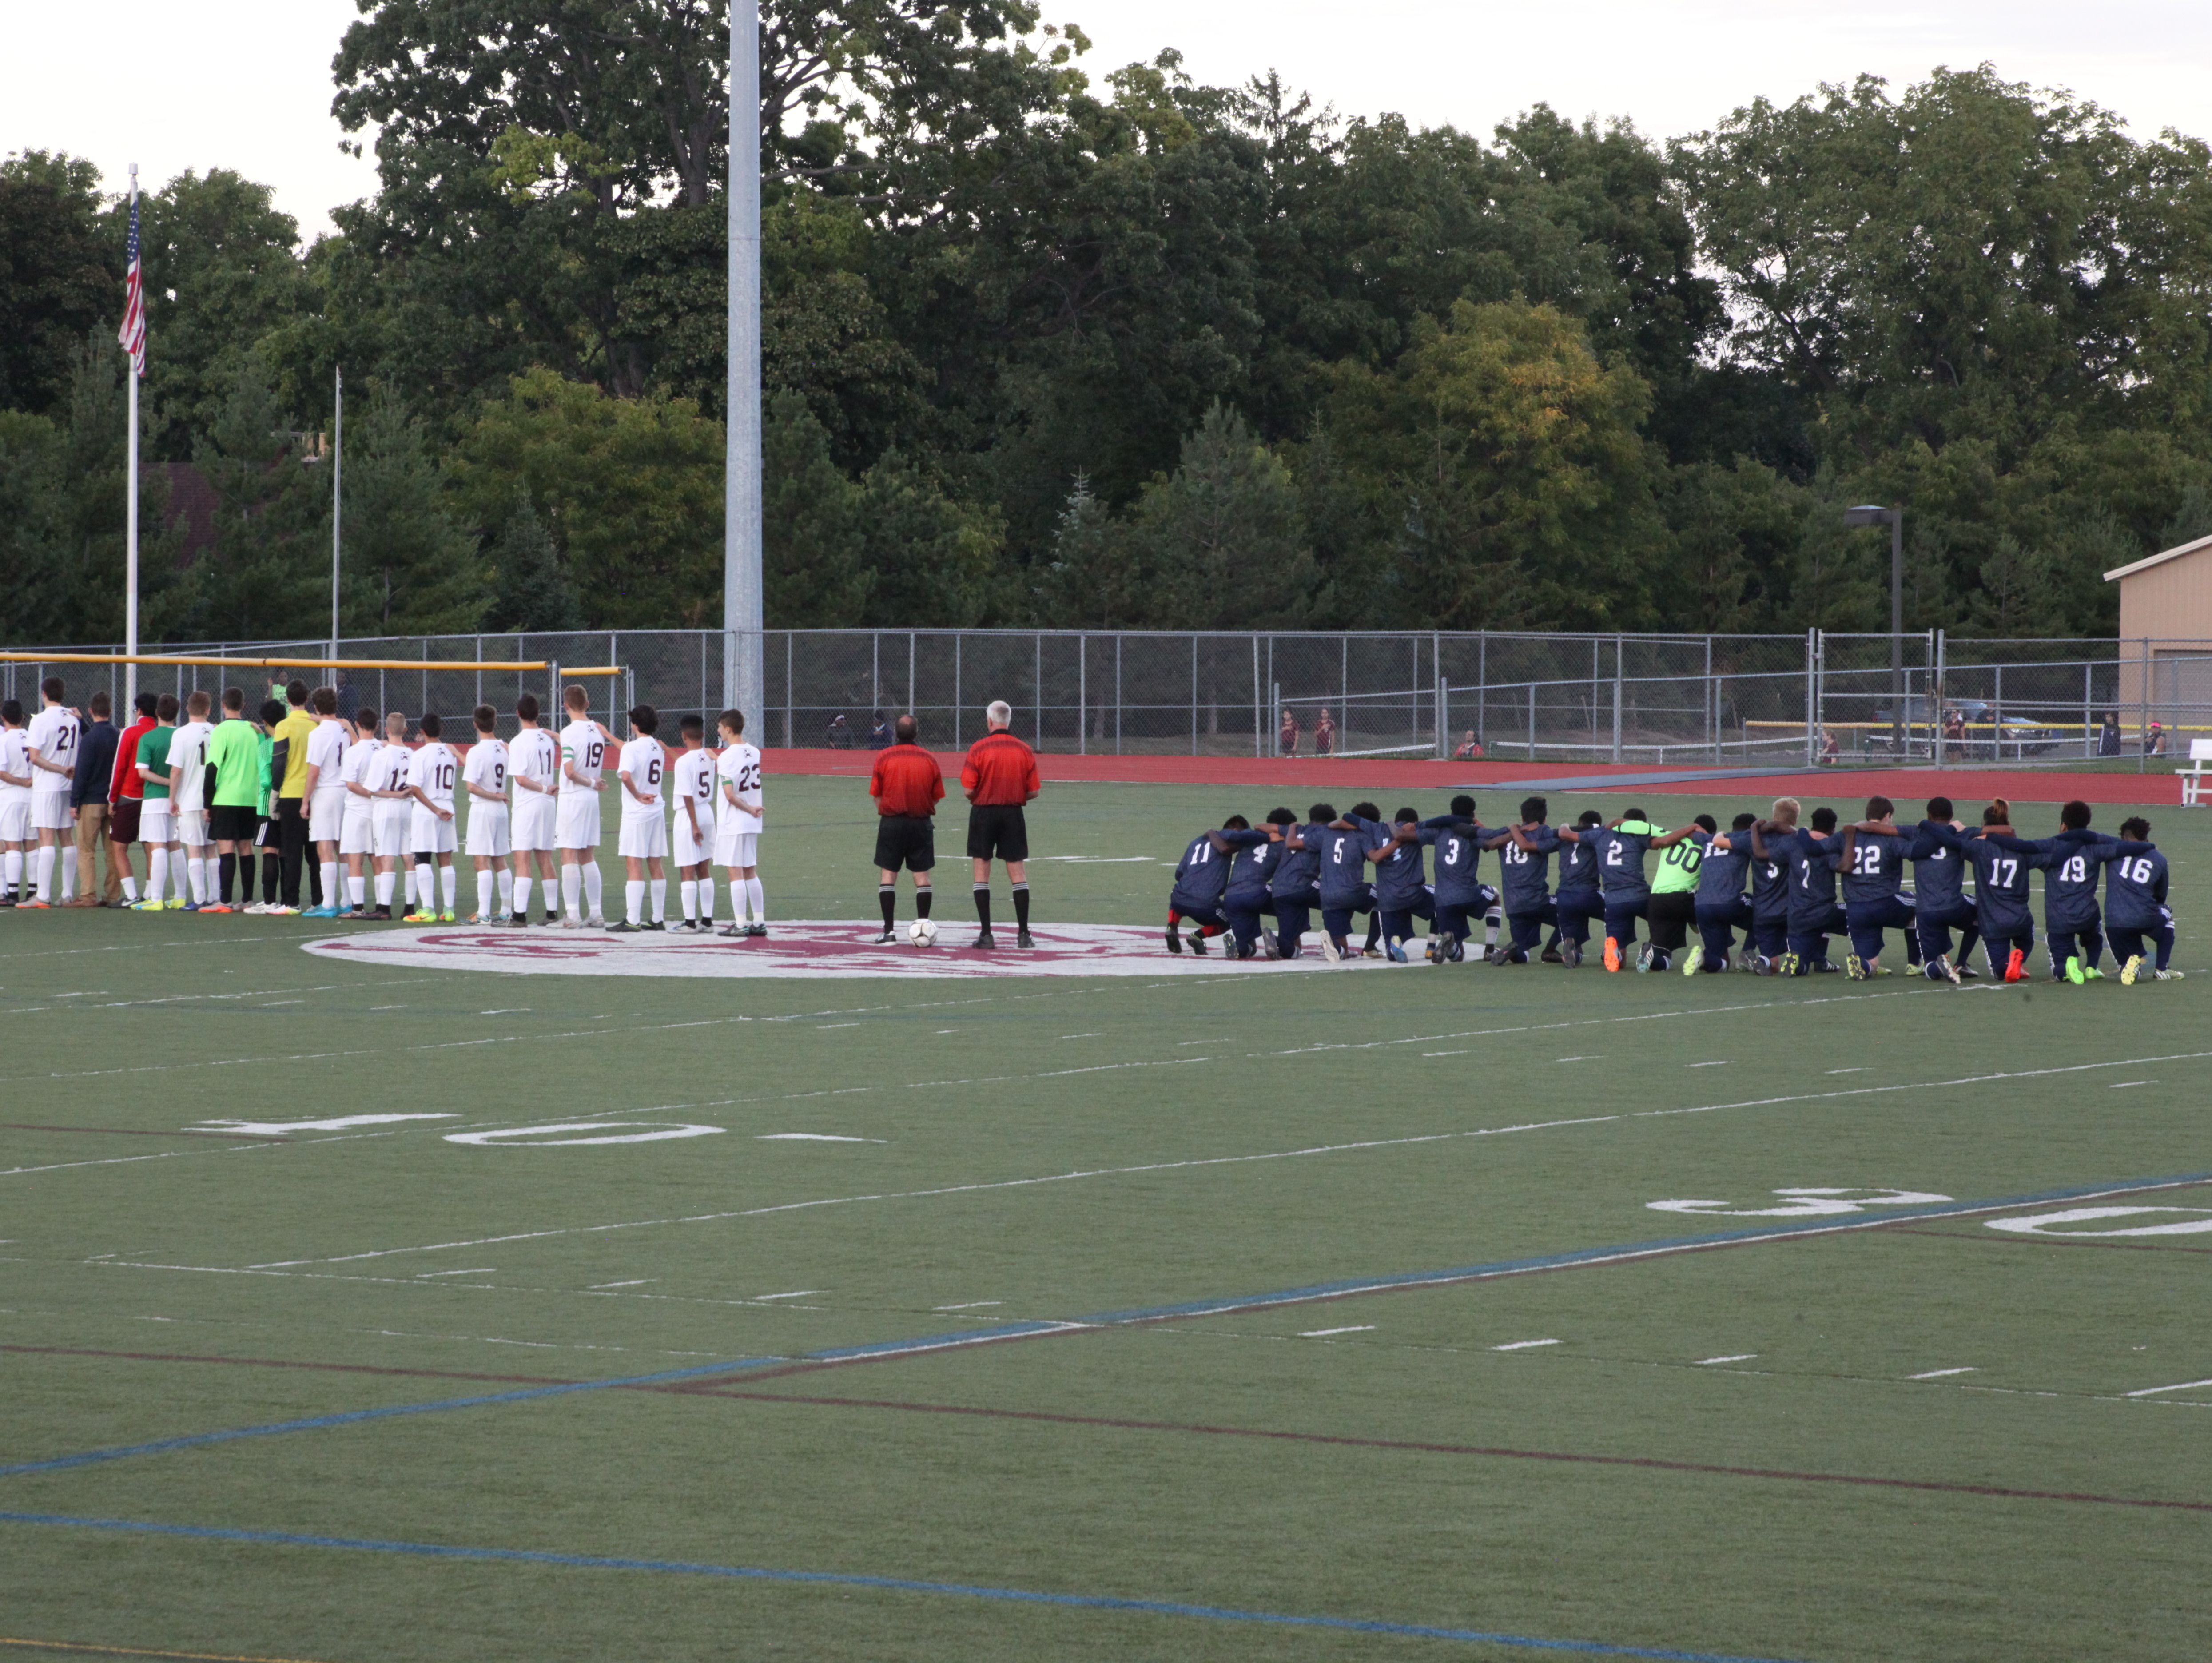 School 58/World of Inquiry boys soccer players kneel during the national anthem prior to their game Tuesday with Aquinas.